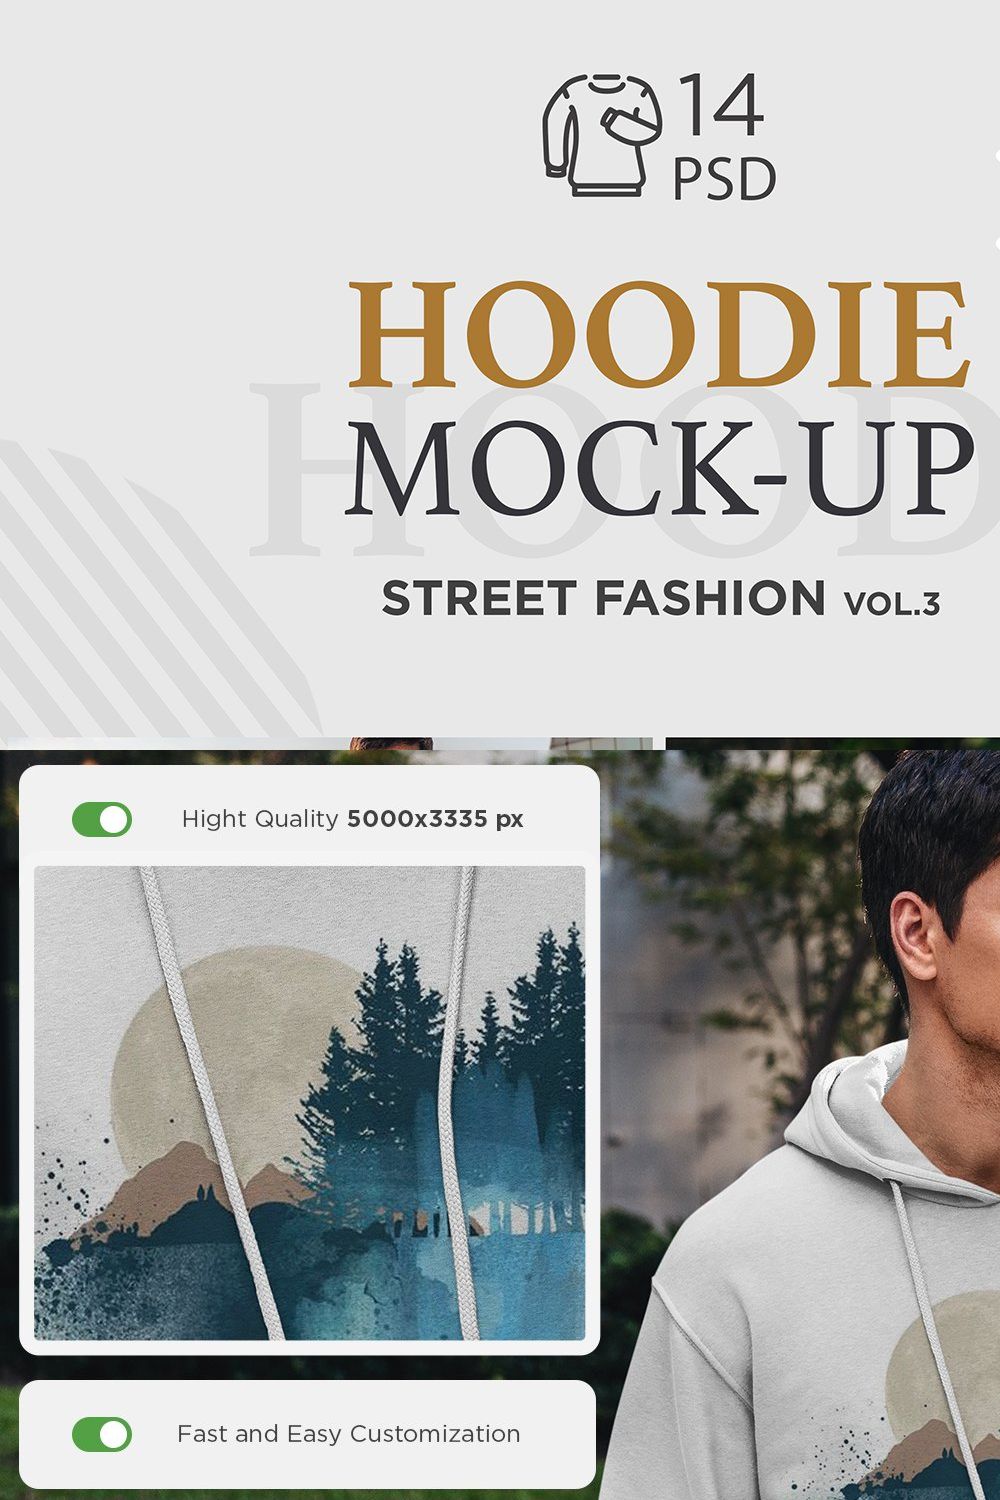 Hoodie Mock-Up Street Fashion vol.3 pinterest preview image.